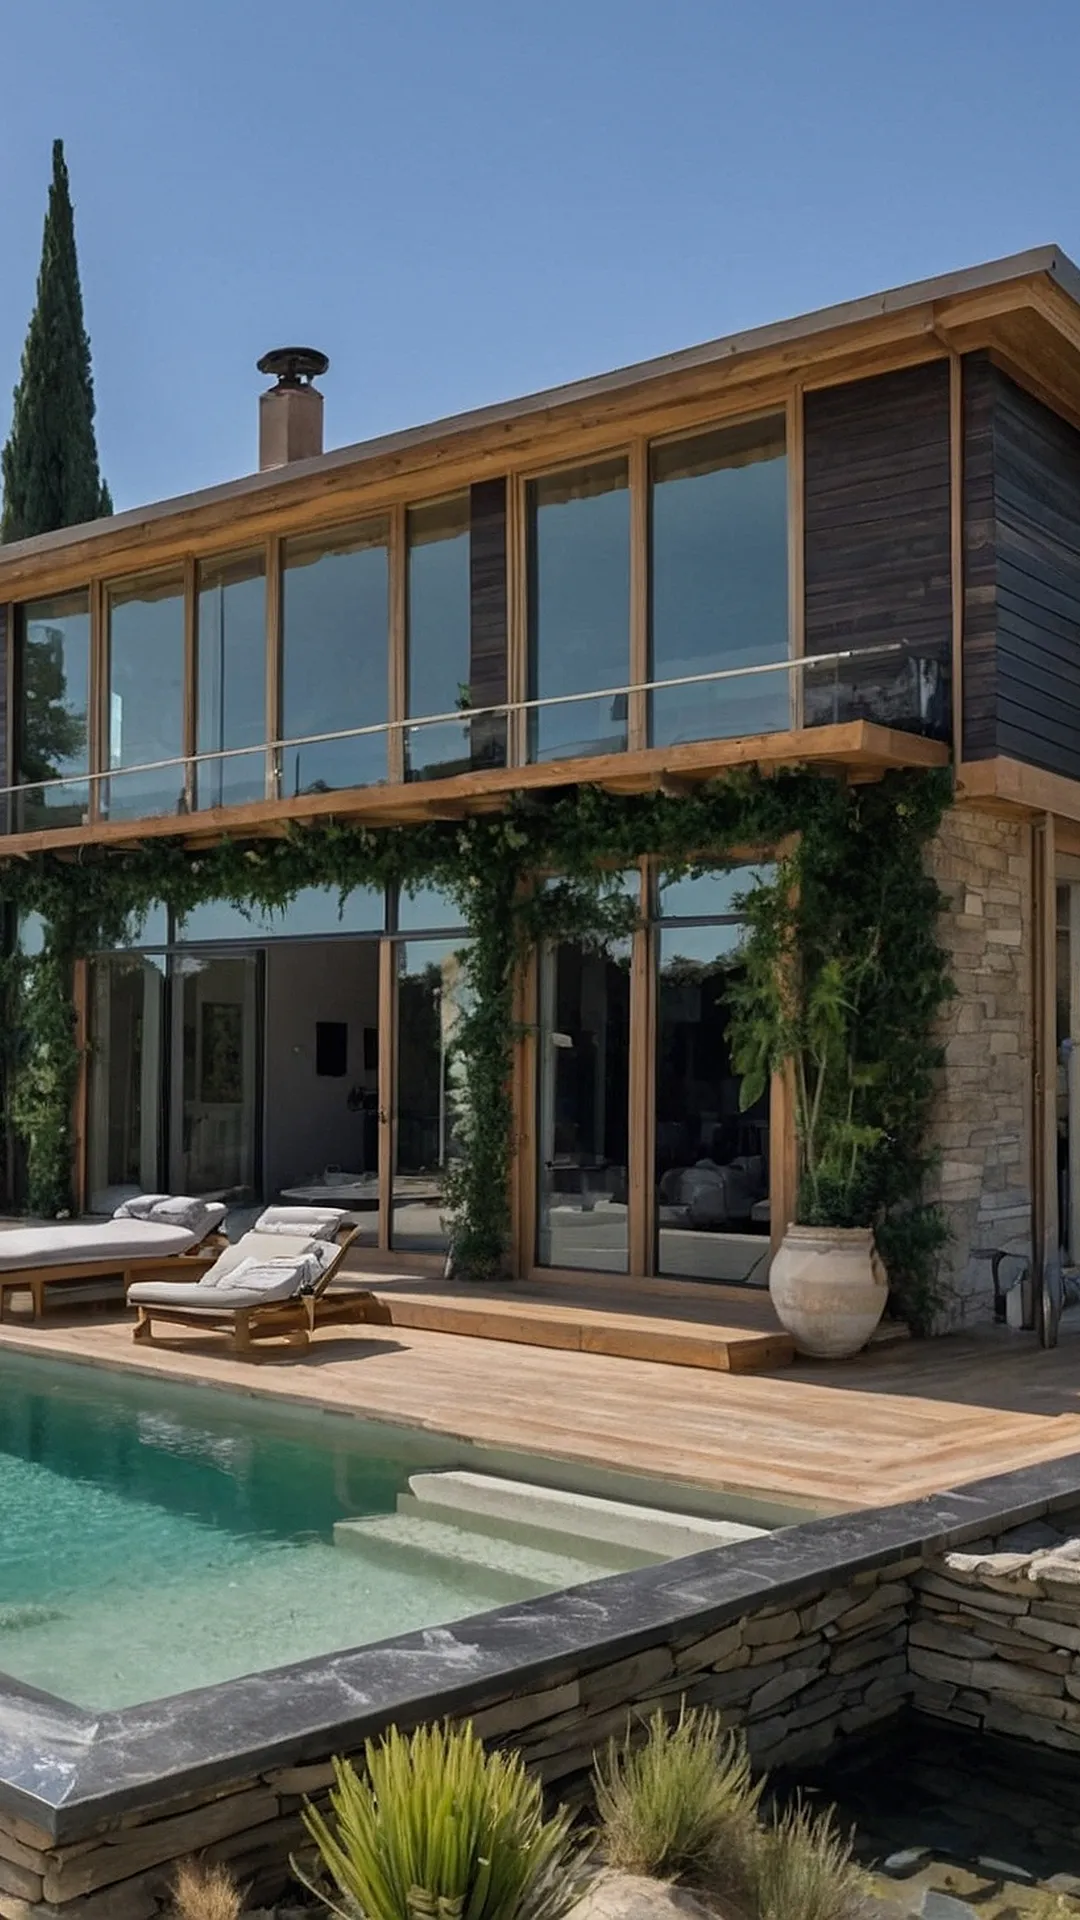 Dream Dwellings: A Collection of Stunning Homes